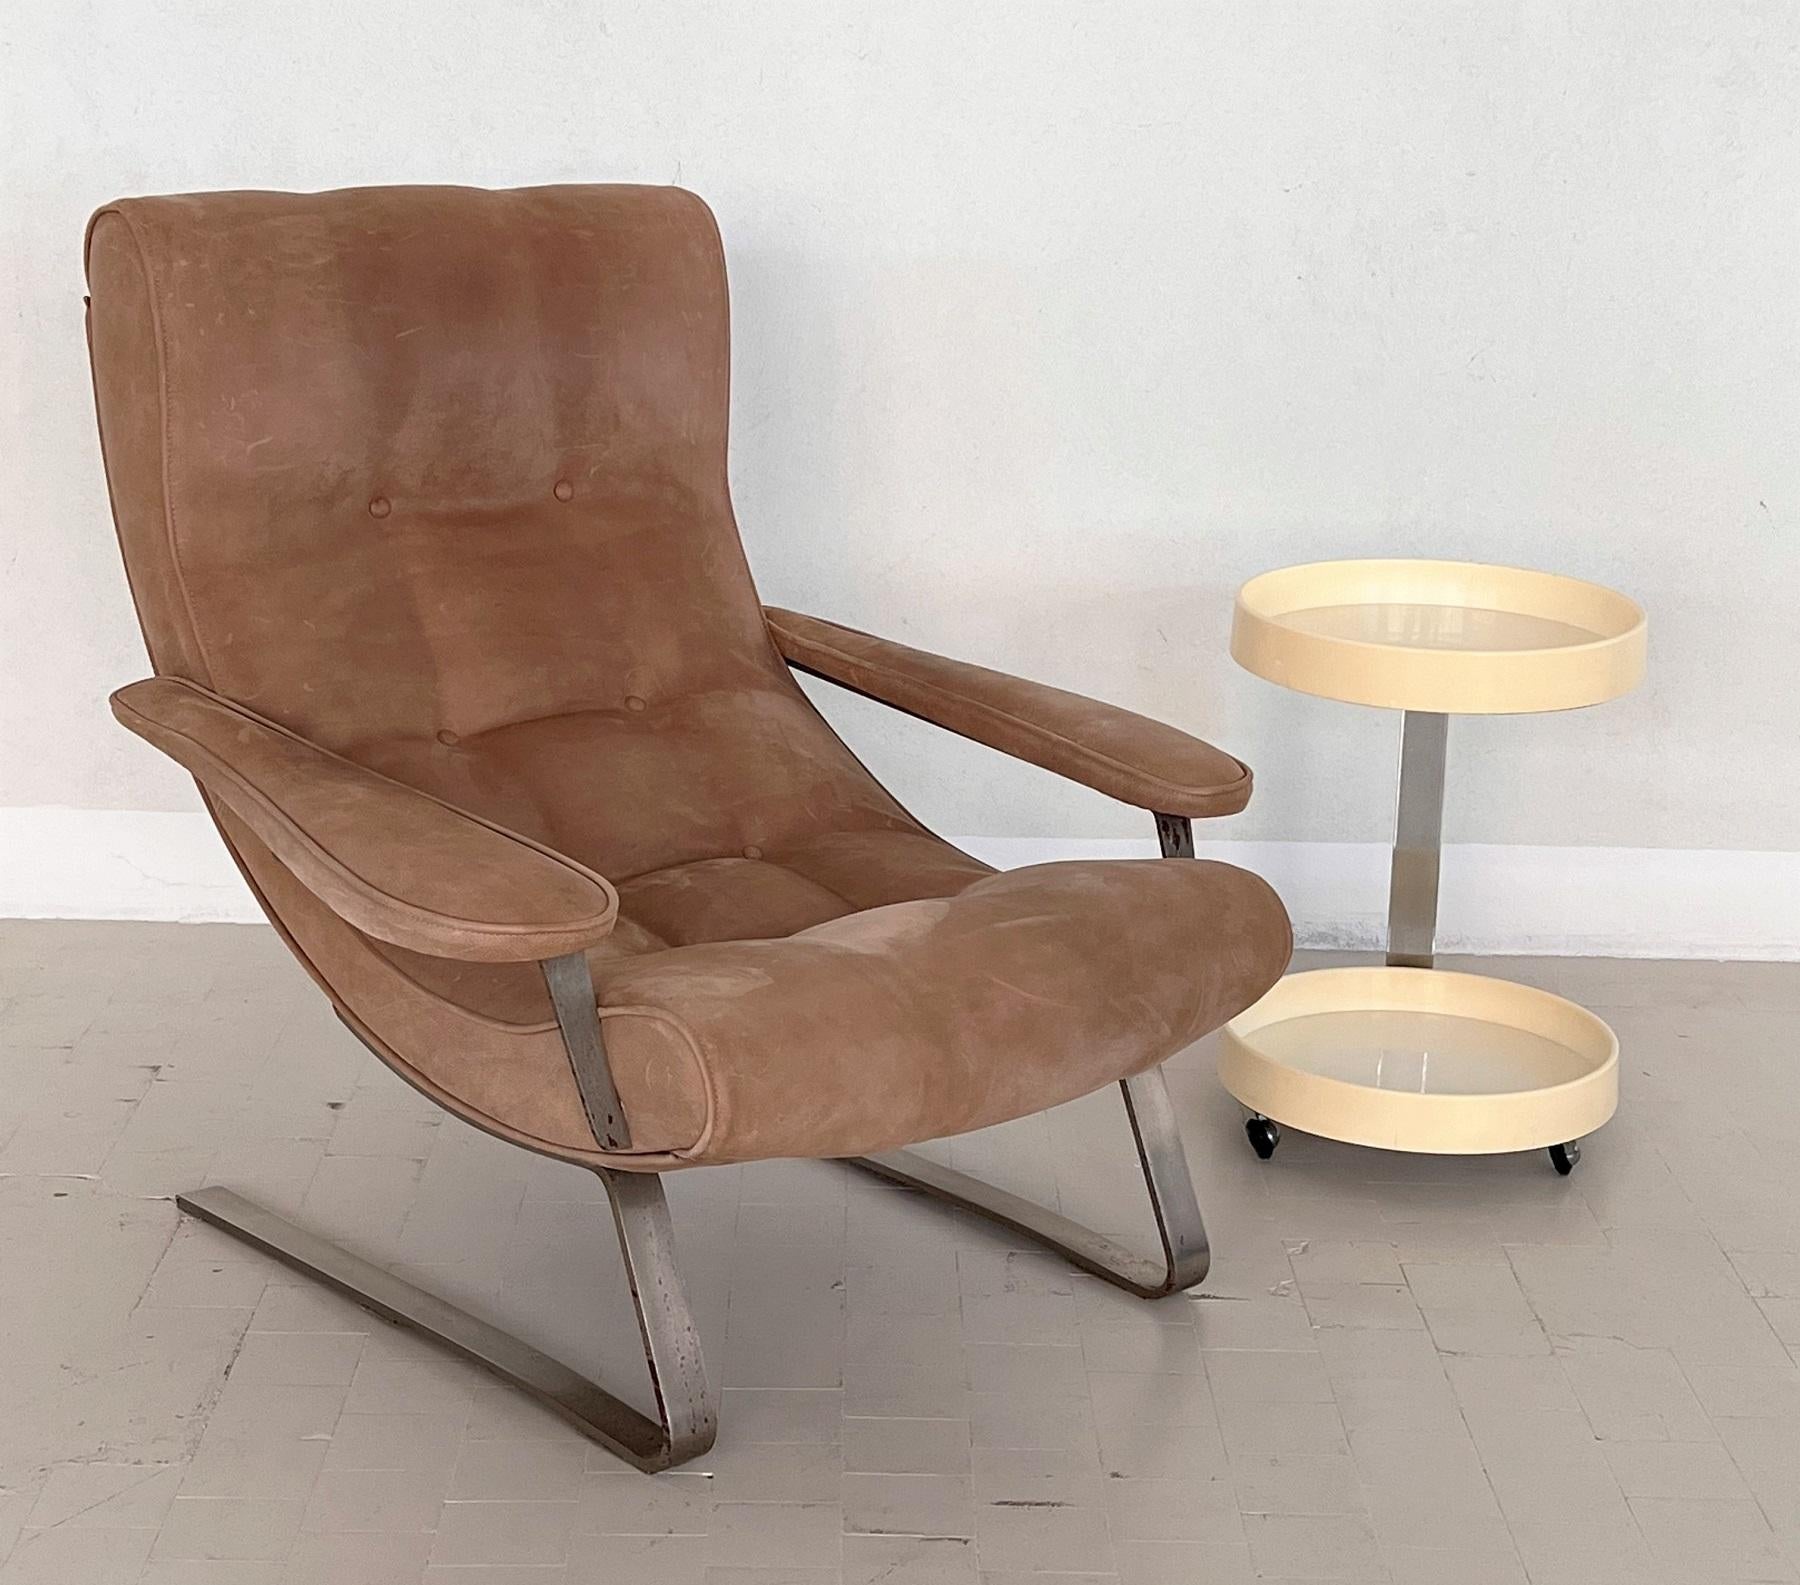 Large lounge chair designed by Guido Bonzani, manufactured by Tecnosalotto in the 1970s, Italy.
The chair has spring feet made of strong steel and are chromed; the chrome plate shows signs of use and wear, which gives even more value to the vintage